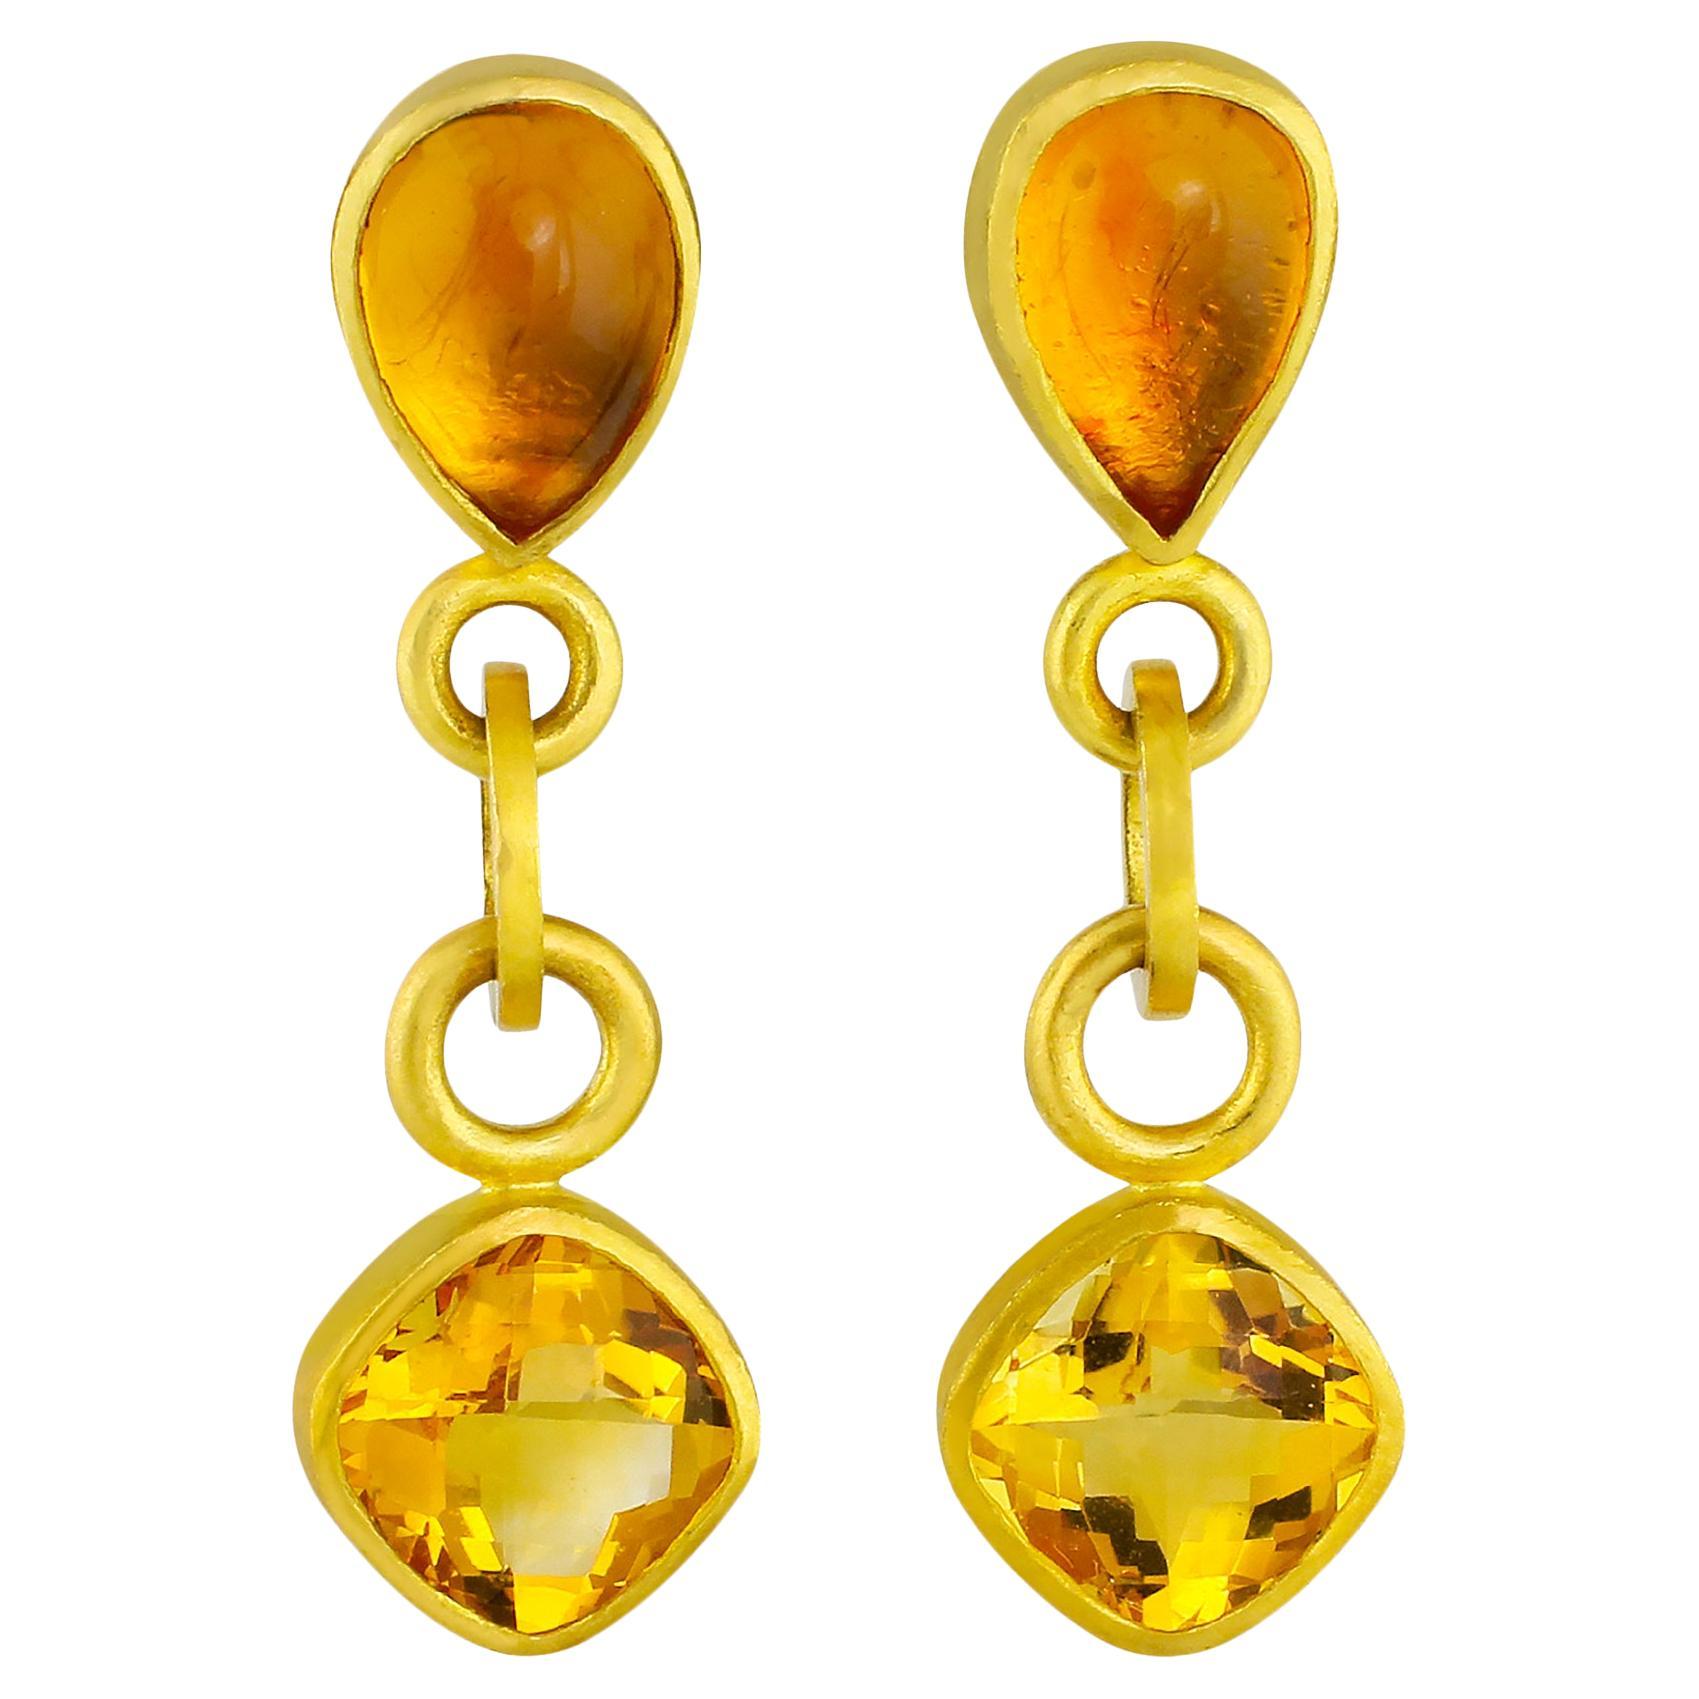 PHILIPPE SPENCER 7.3 Ct. Gold Citrines in 22K & 20K Gold Dangling Earrings For Sale